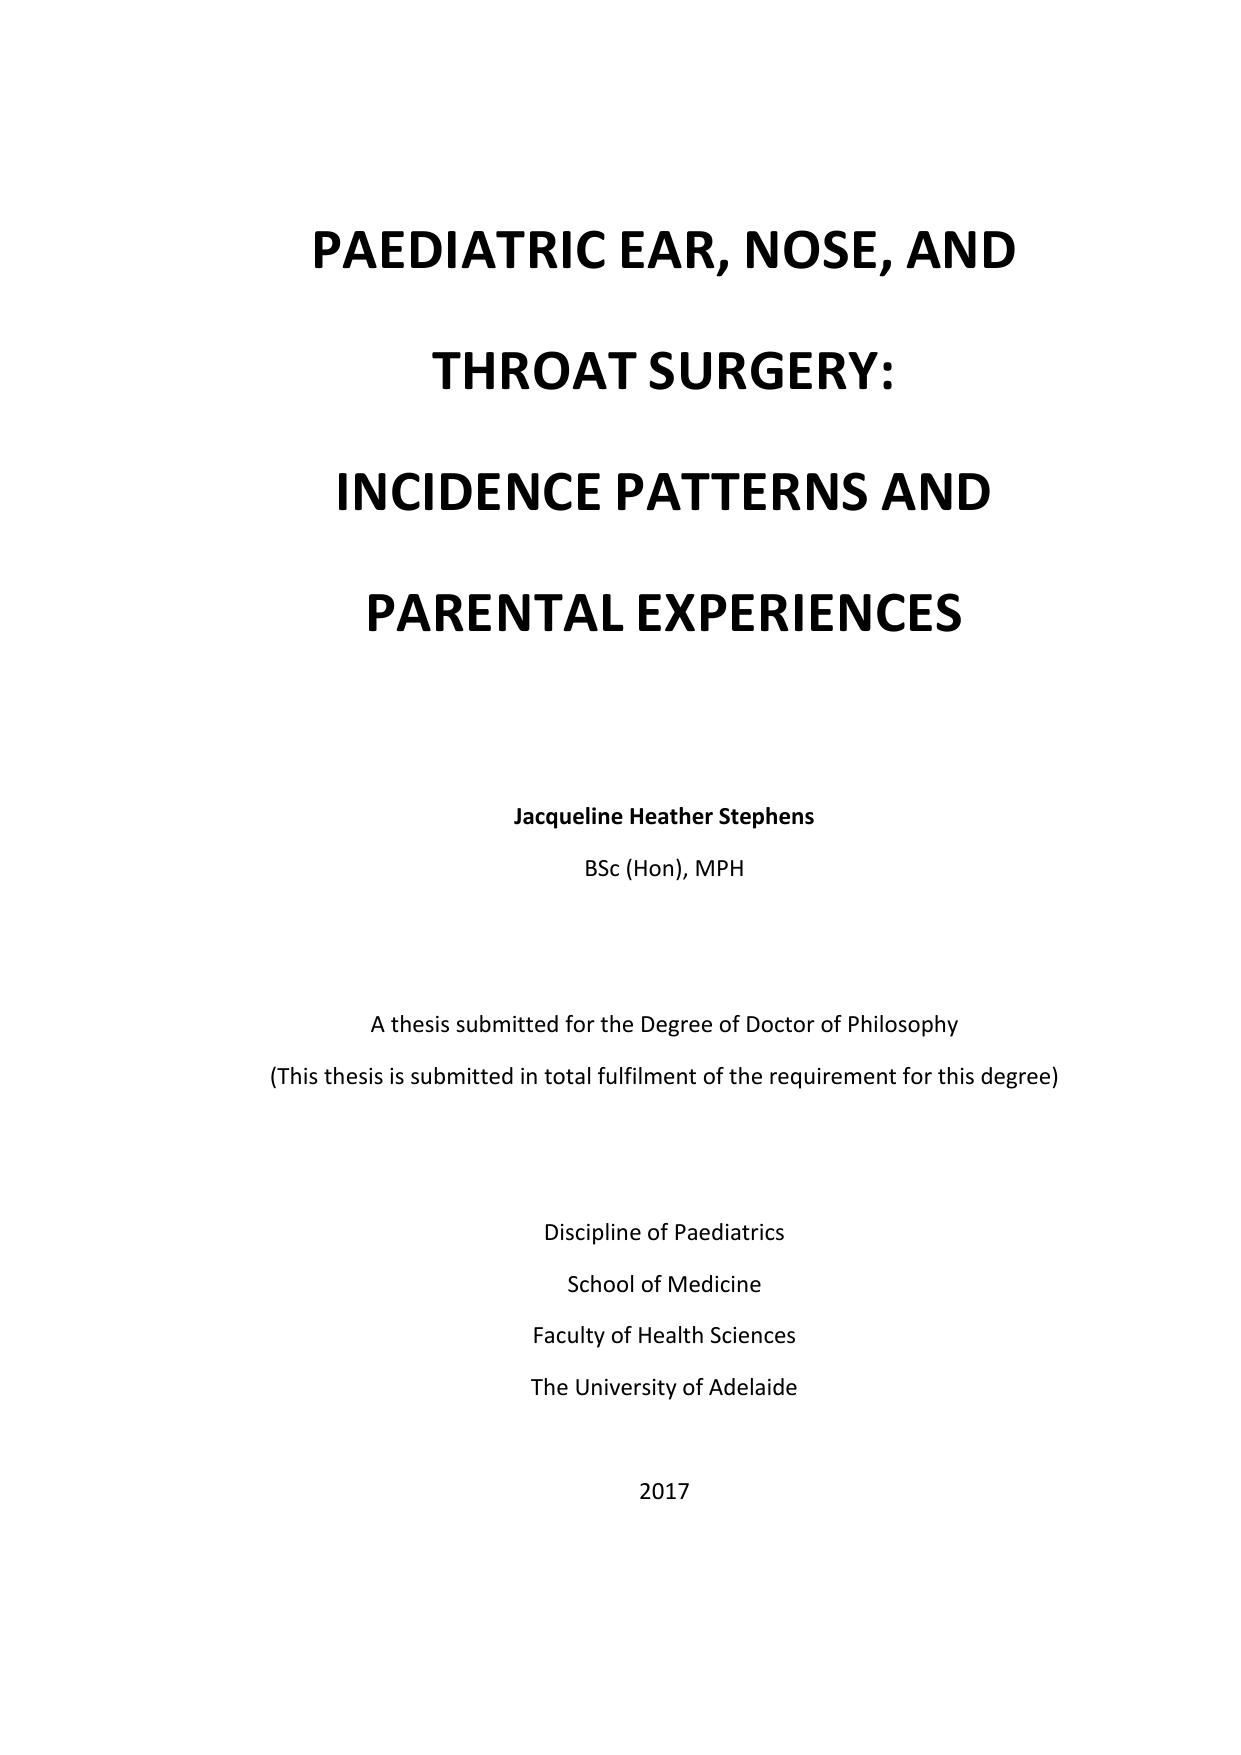 PAEDIATRIC EAR, NOSE, AND THROAT SURGERY: INCIDENCE PATTERNS AND PARENTAL EXPERIENCES